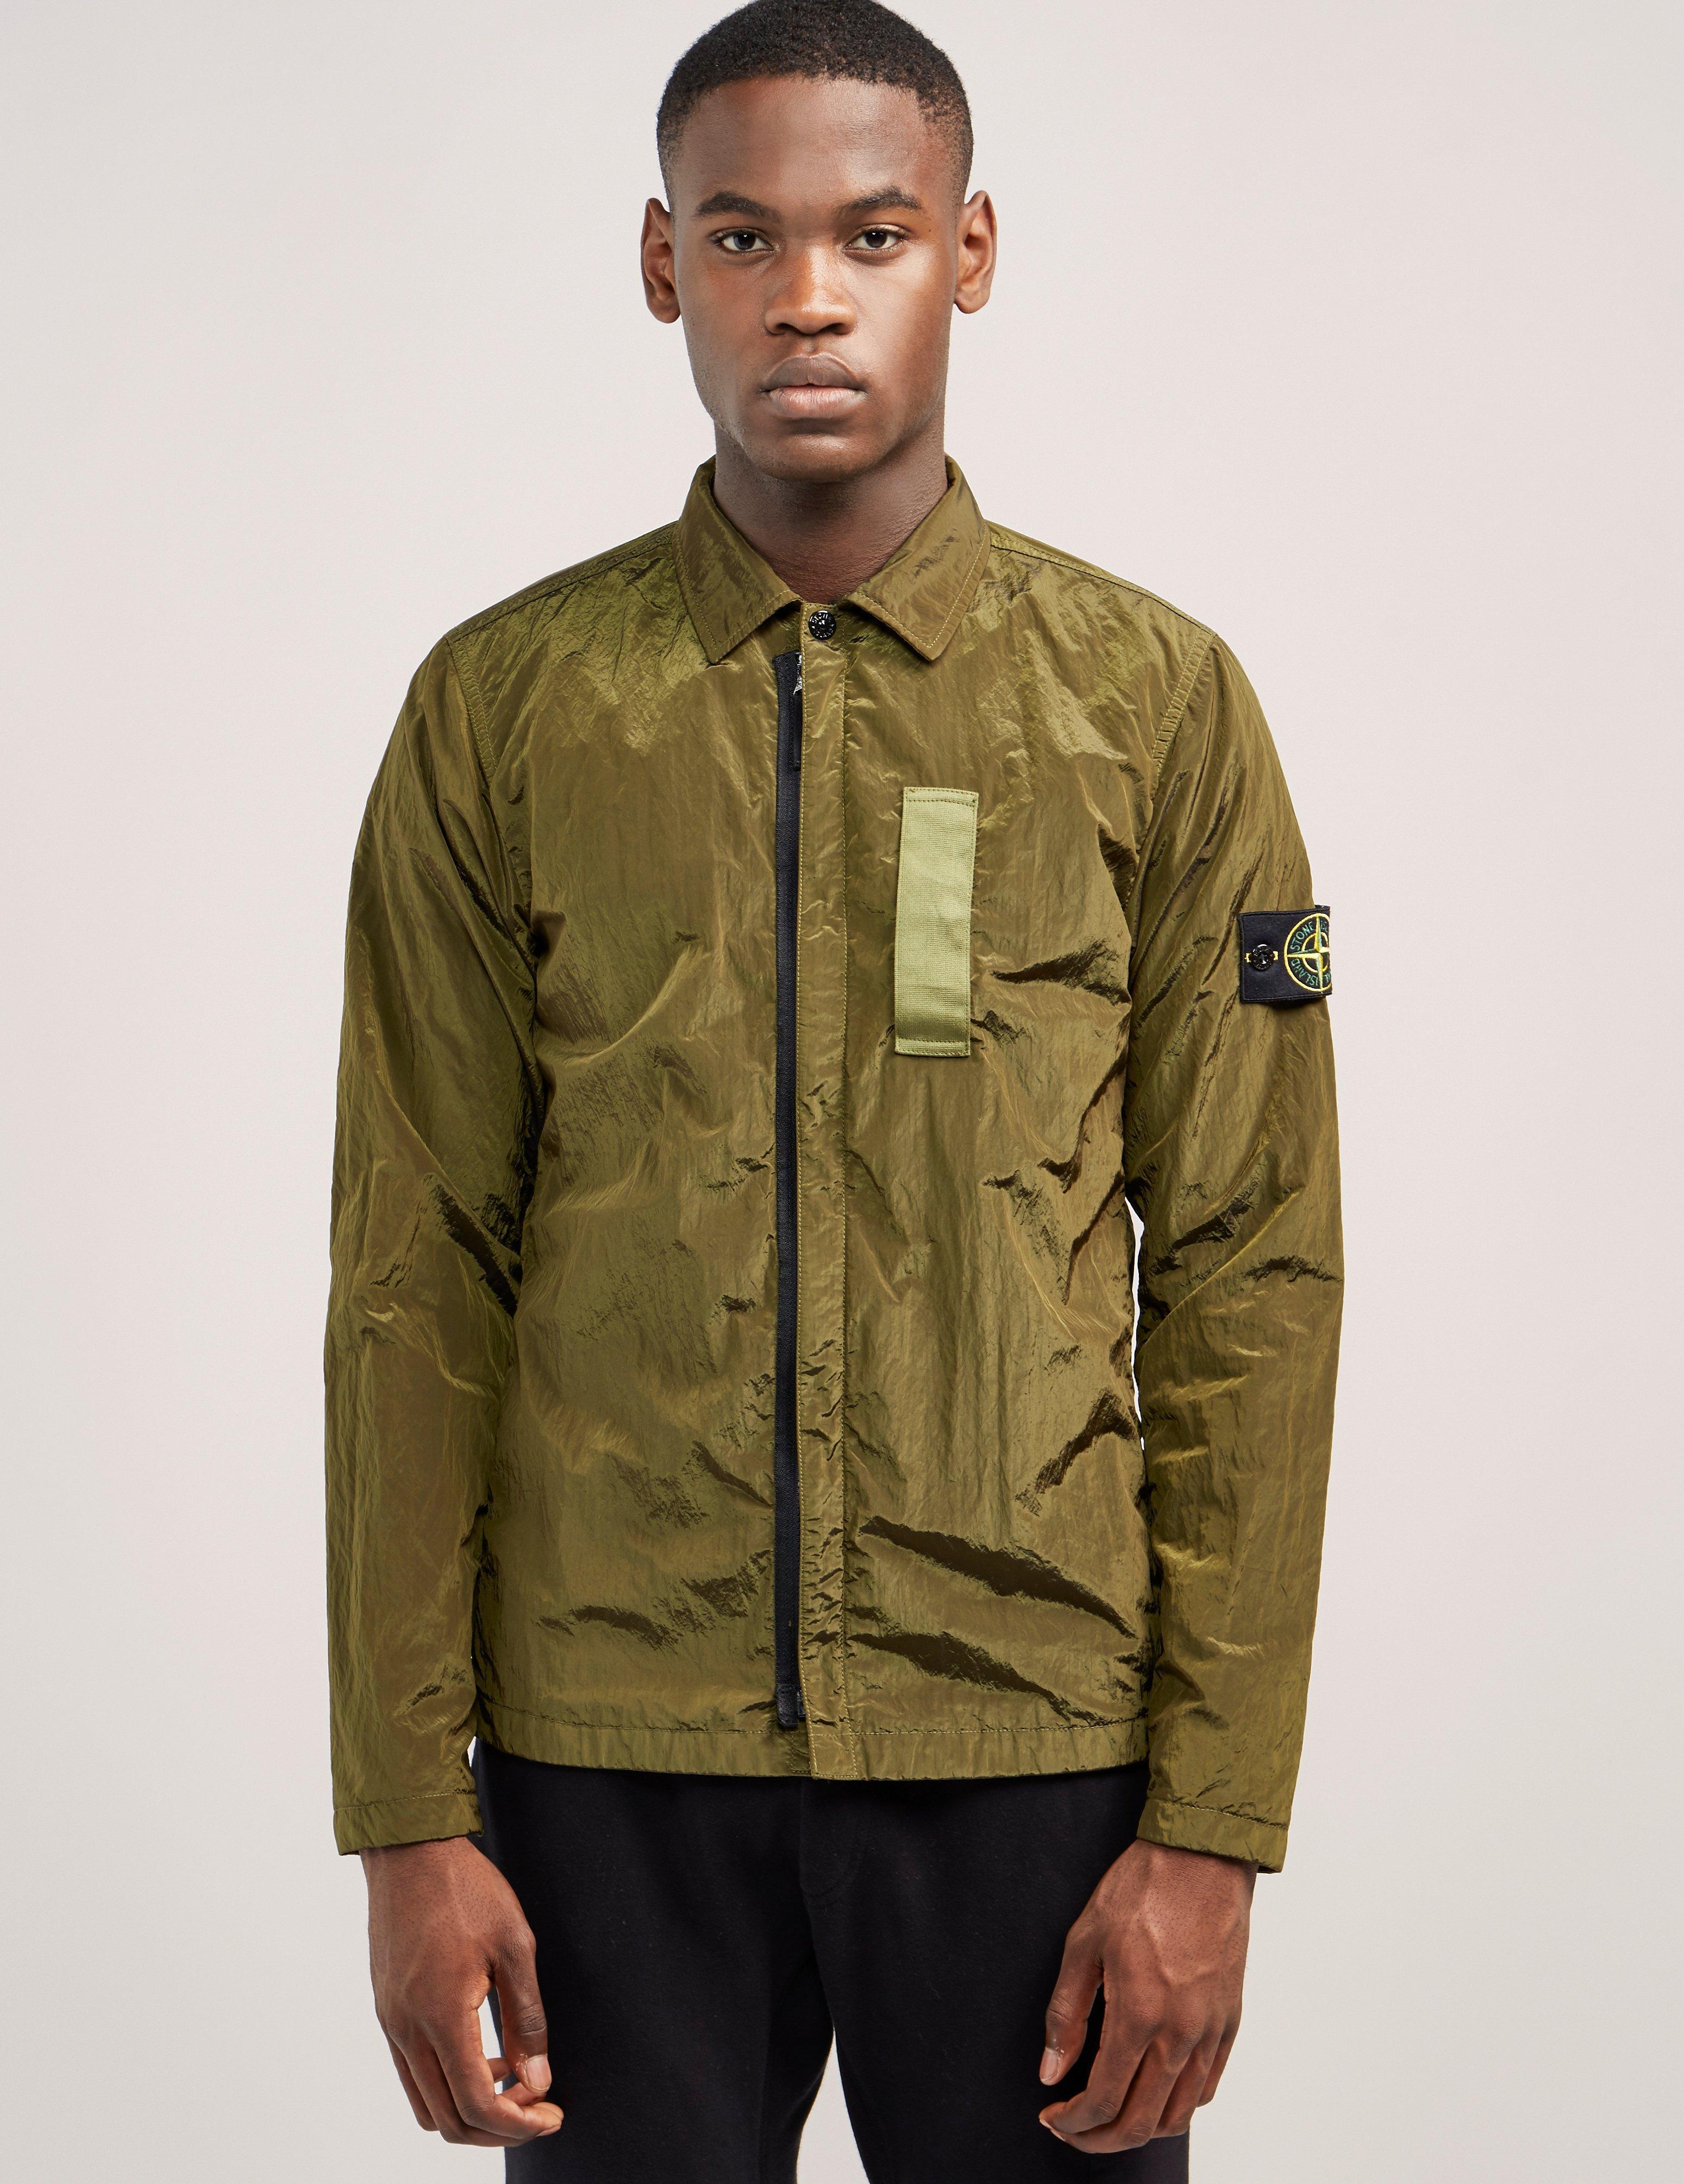 Stone Island Synthetic Nylon Metal Overshirt in Olive (Green) for Men - Lyst